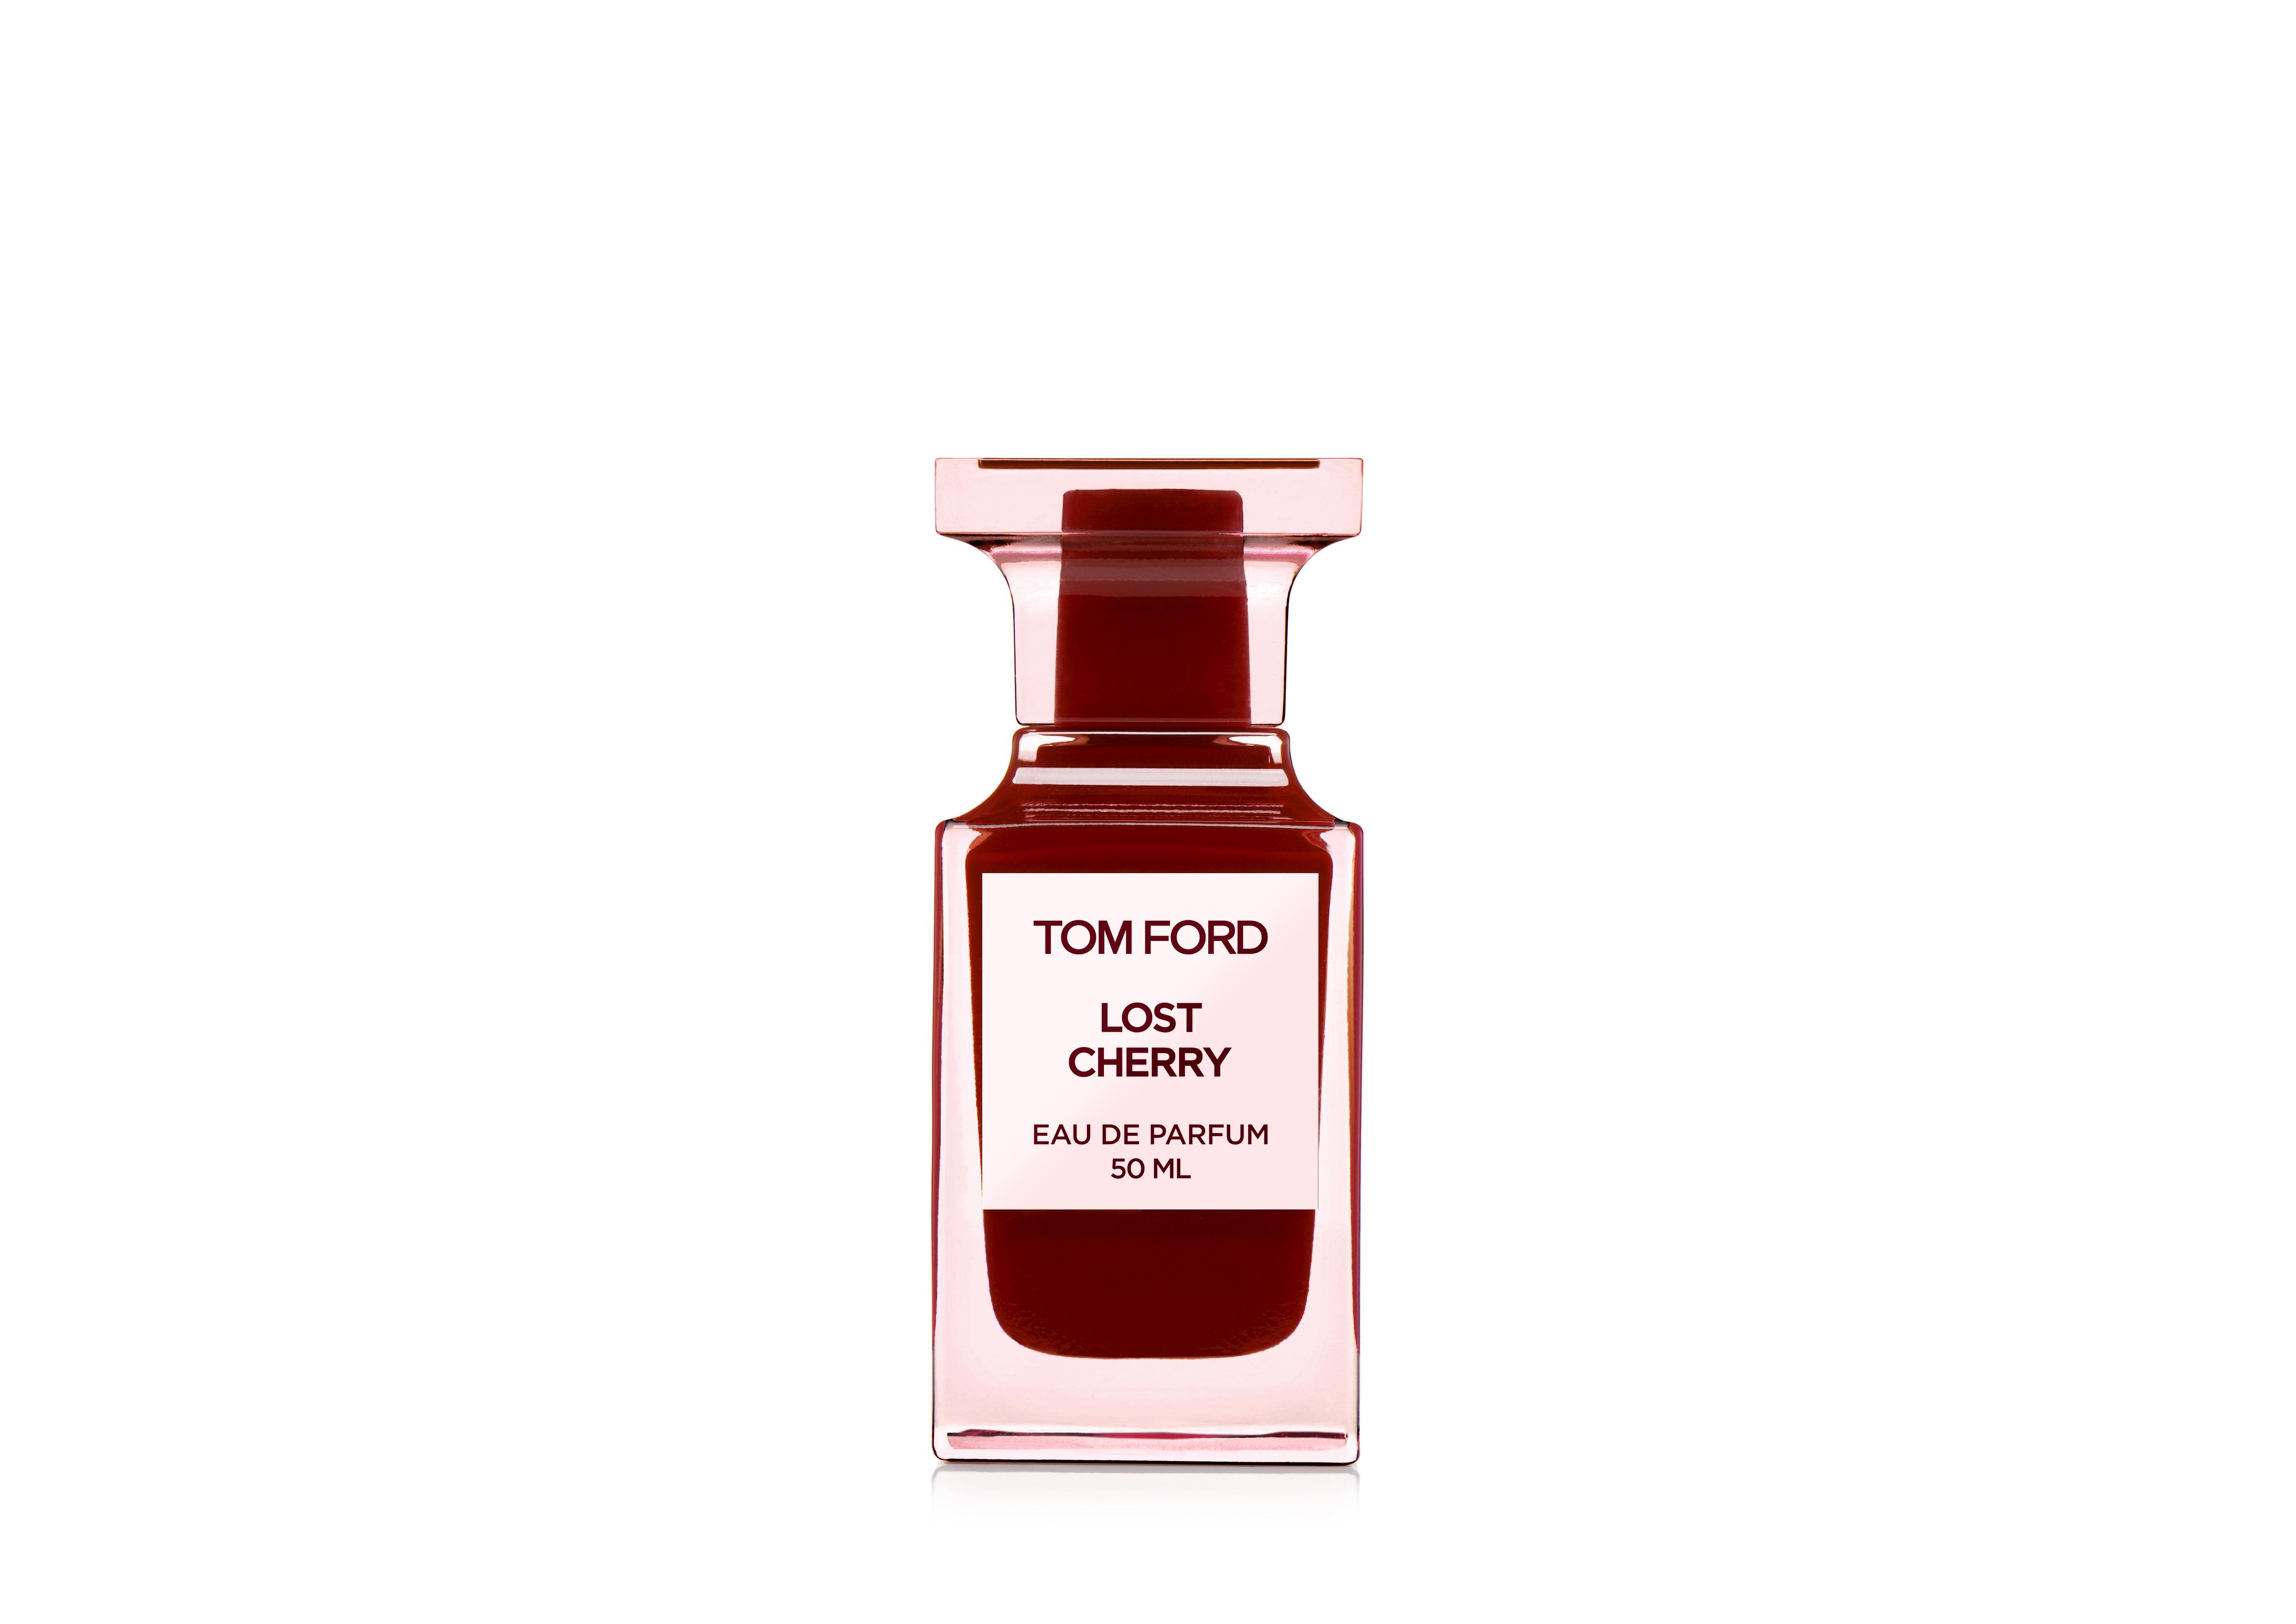 Lost Cherry (Tom Ford) - Review